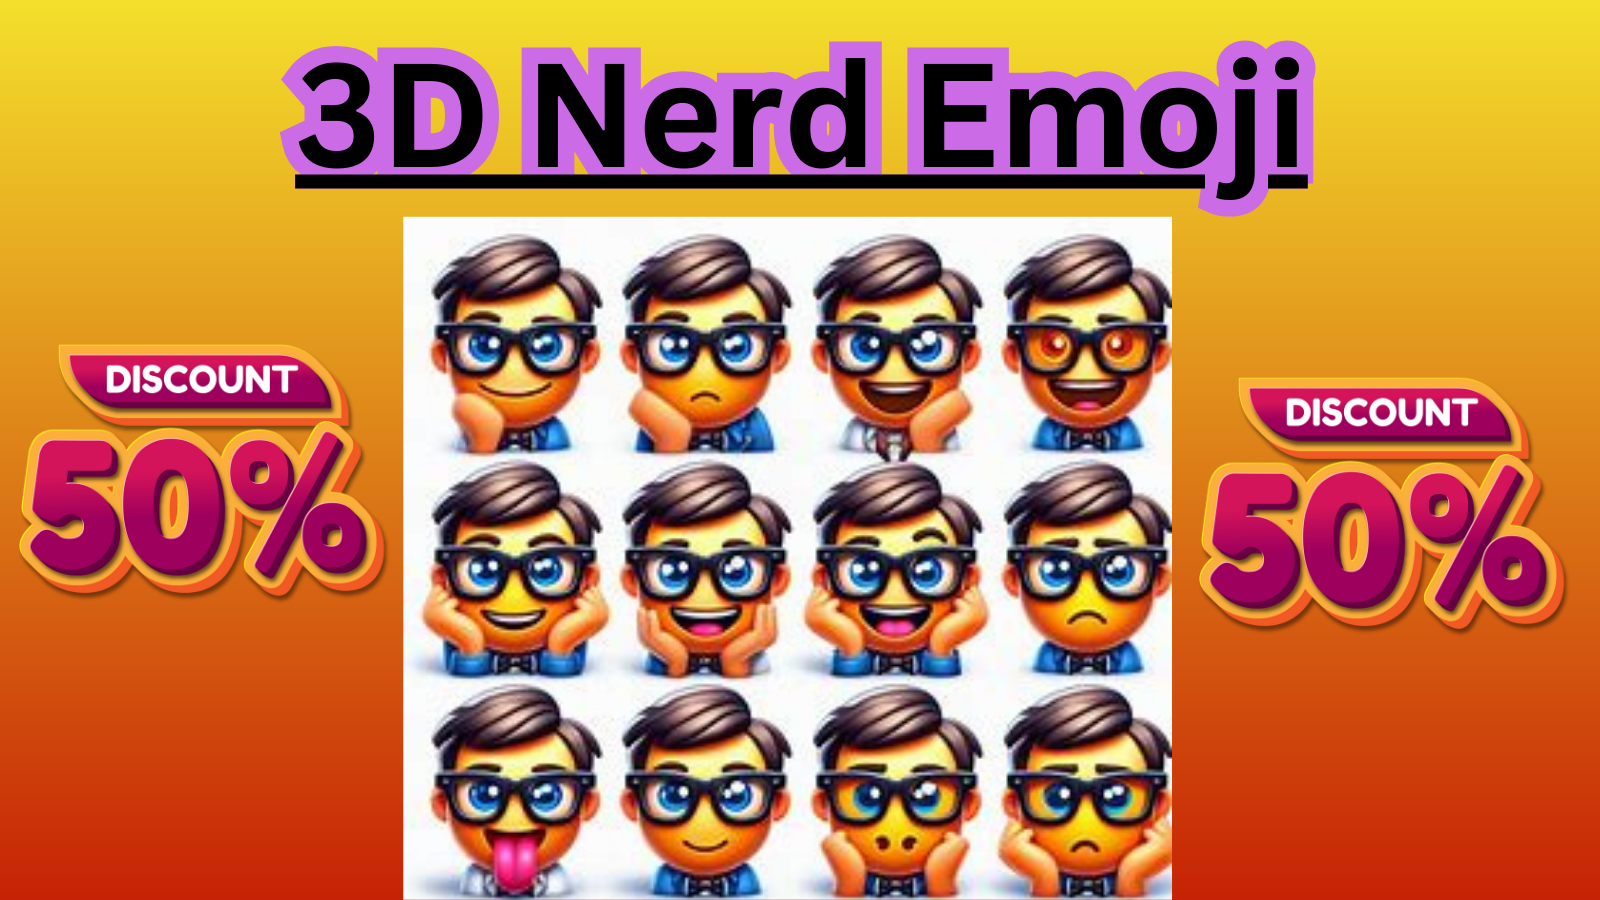 A collection of 12 expressive 3D nerd emojis with varying emotions, showcasing a 50% discount offer.